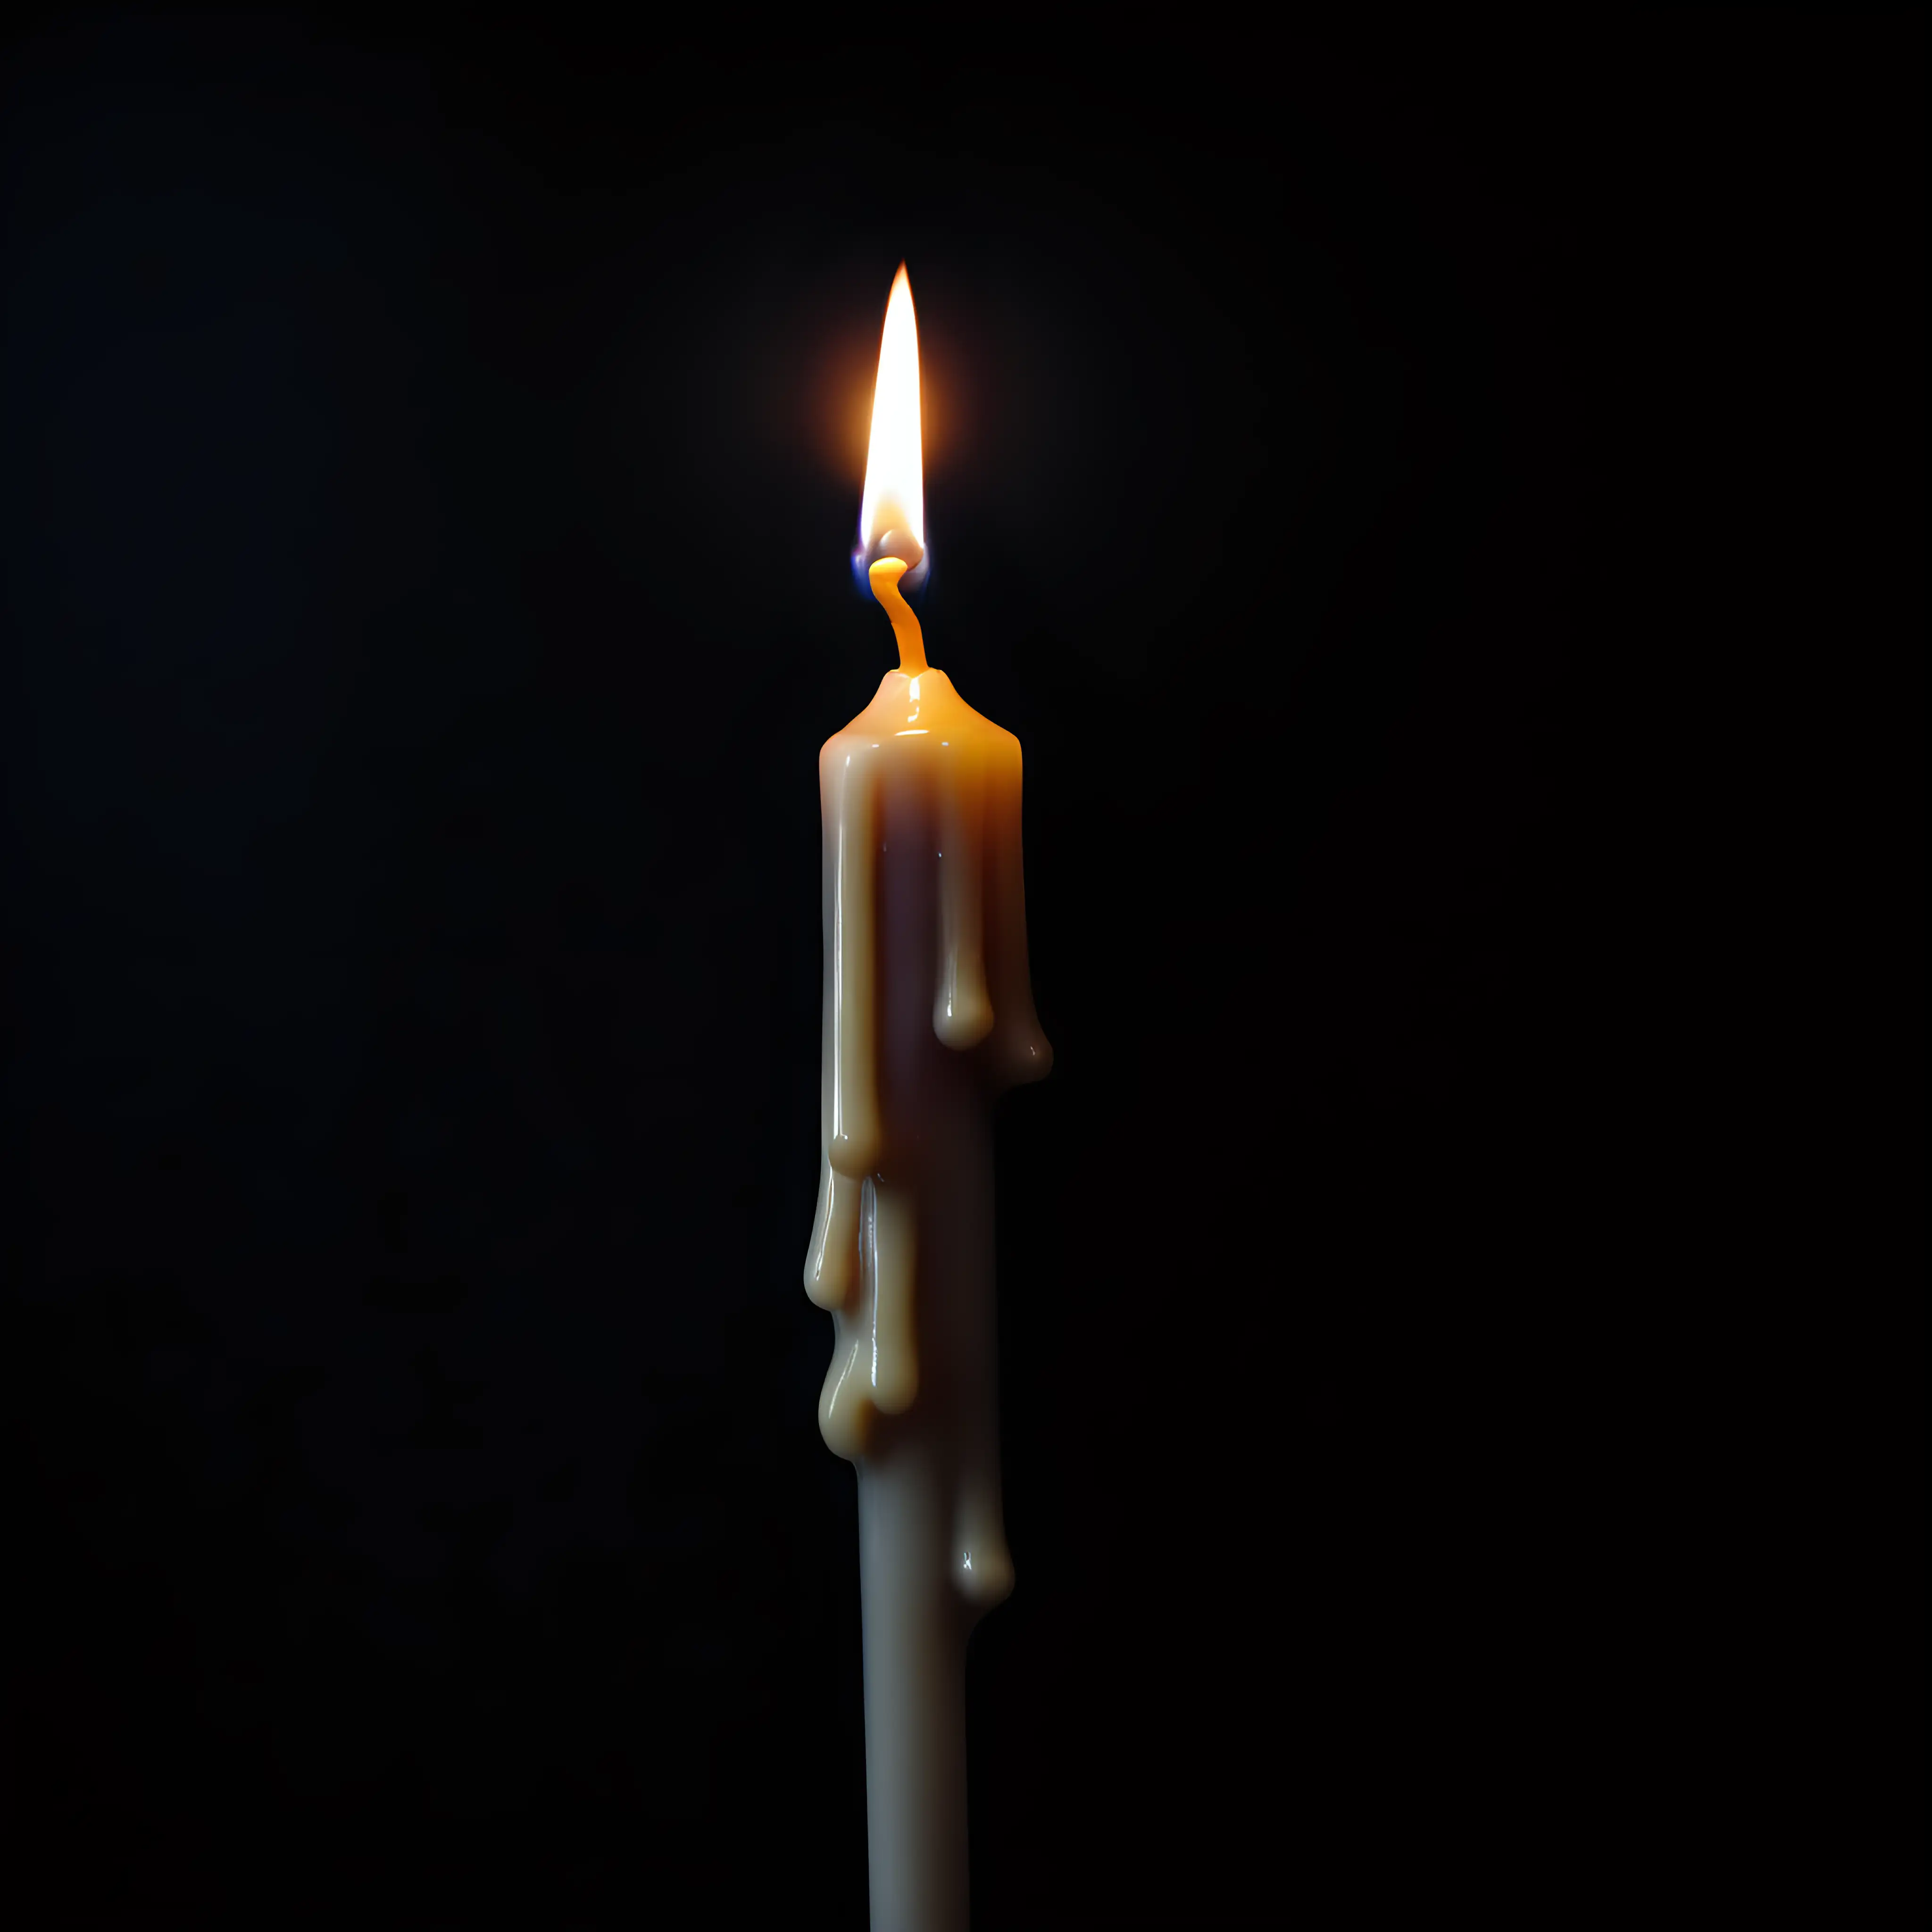 candles nolstalgic feeling, eerie, dark, sad, have candle wax melting on the stick too, just one candle in the image

